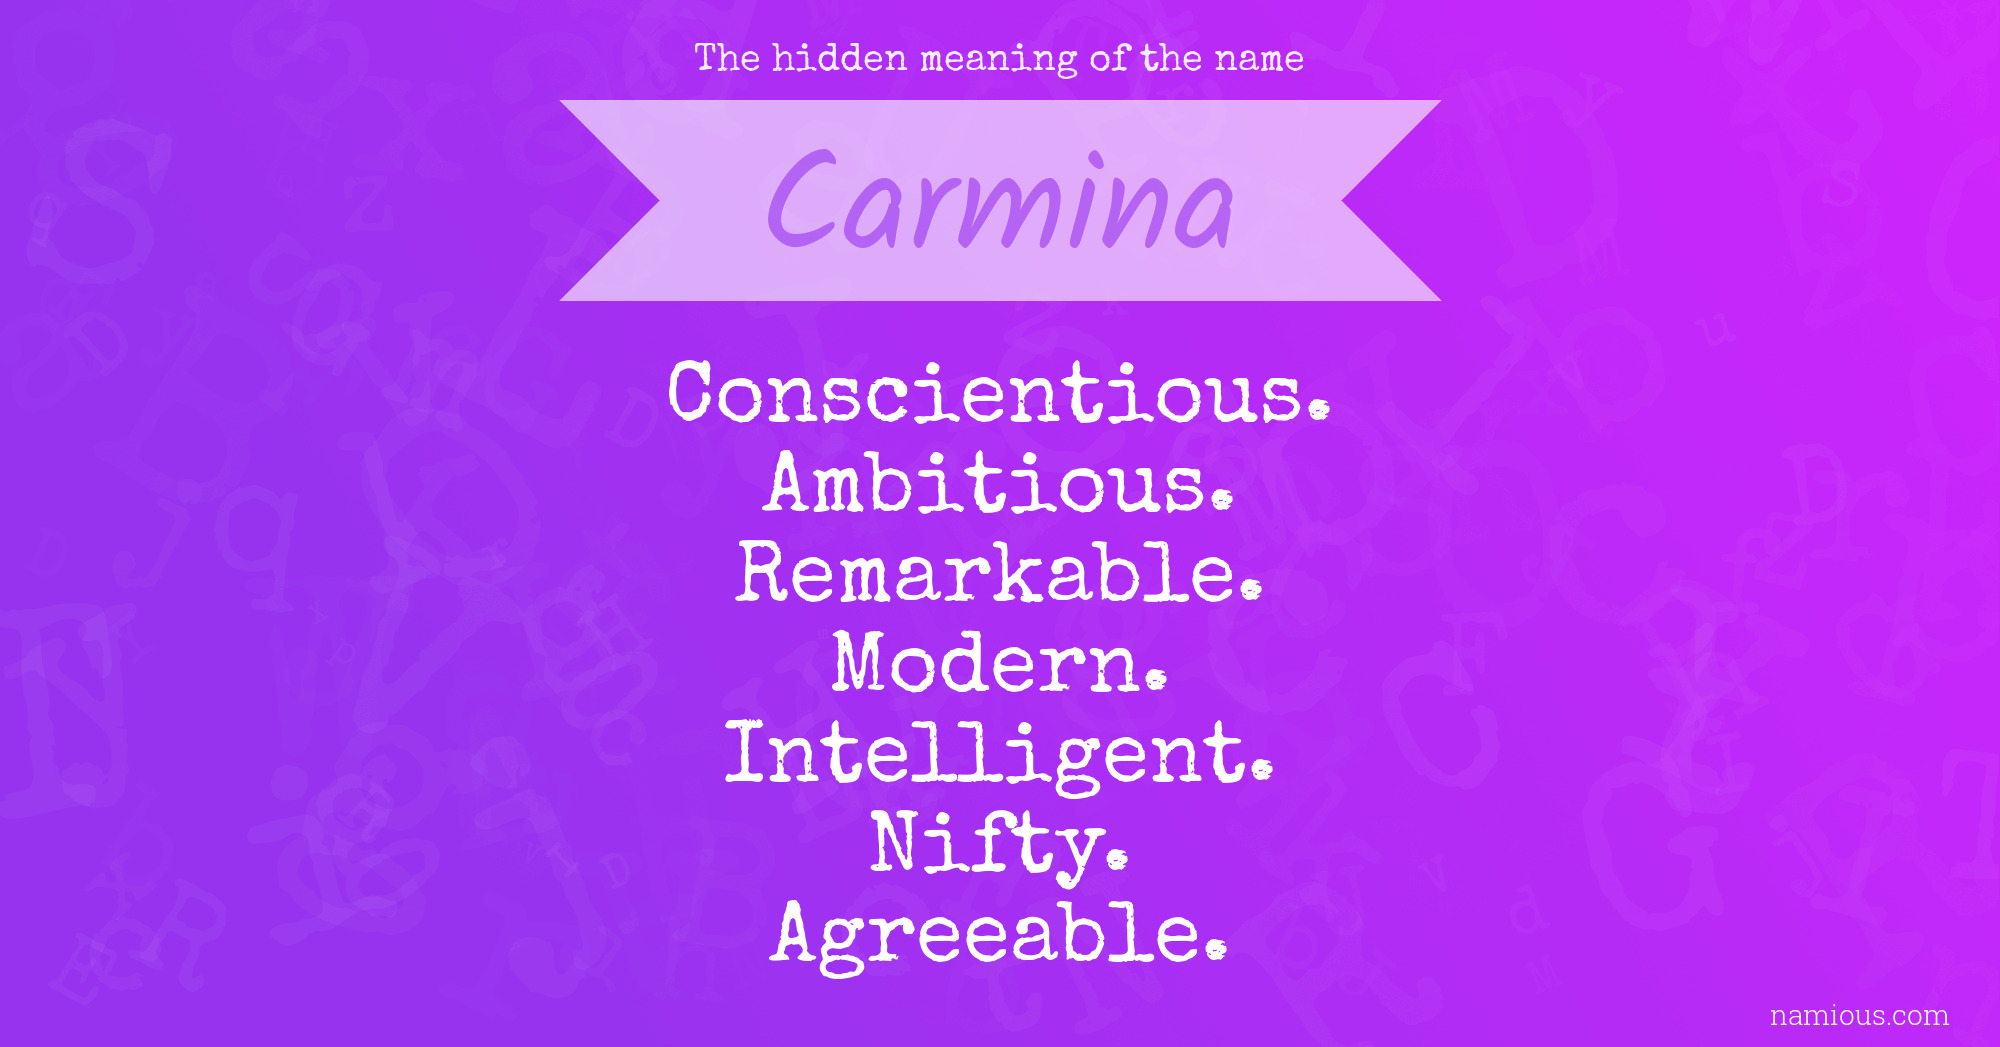 The hidden meaning of the name Carmina